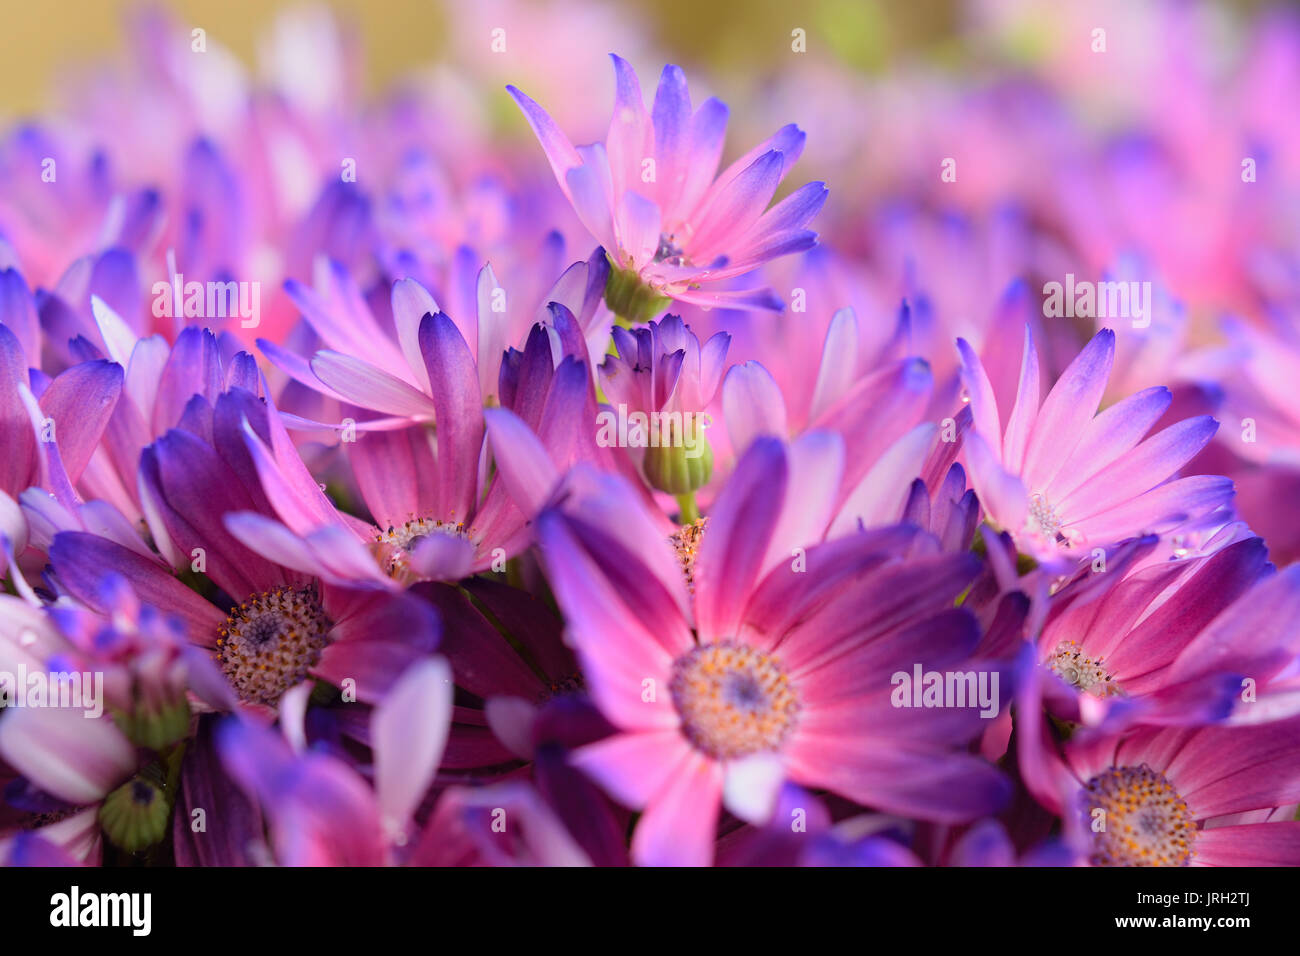 Macro texture of colorful Daisy flower petals Stock Photo